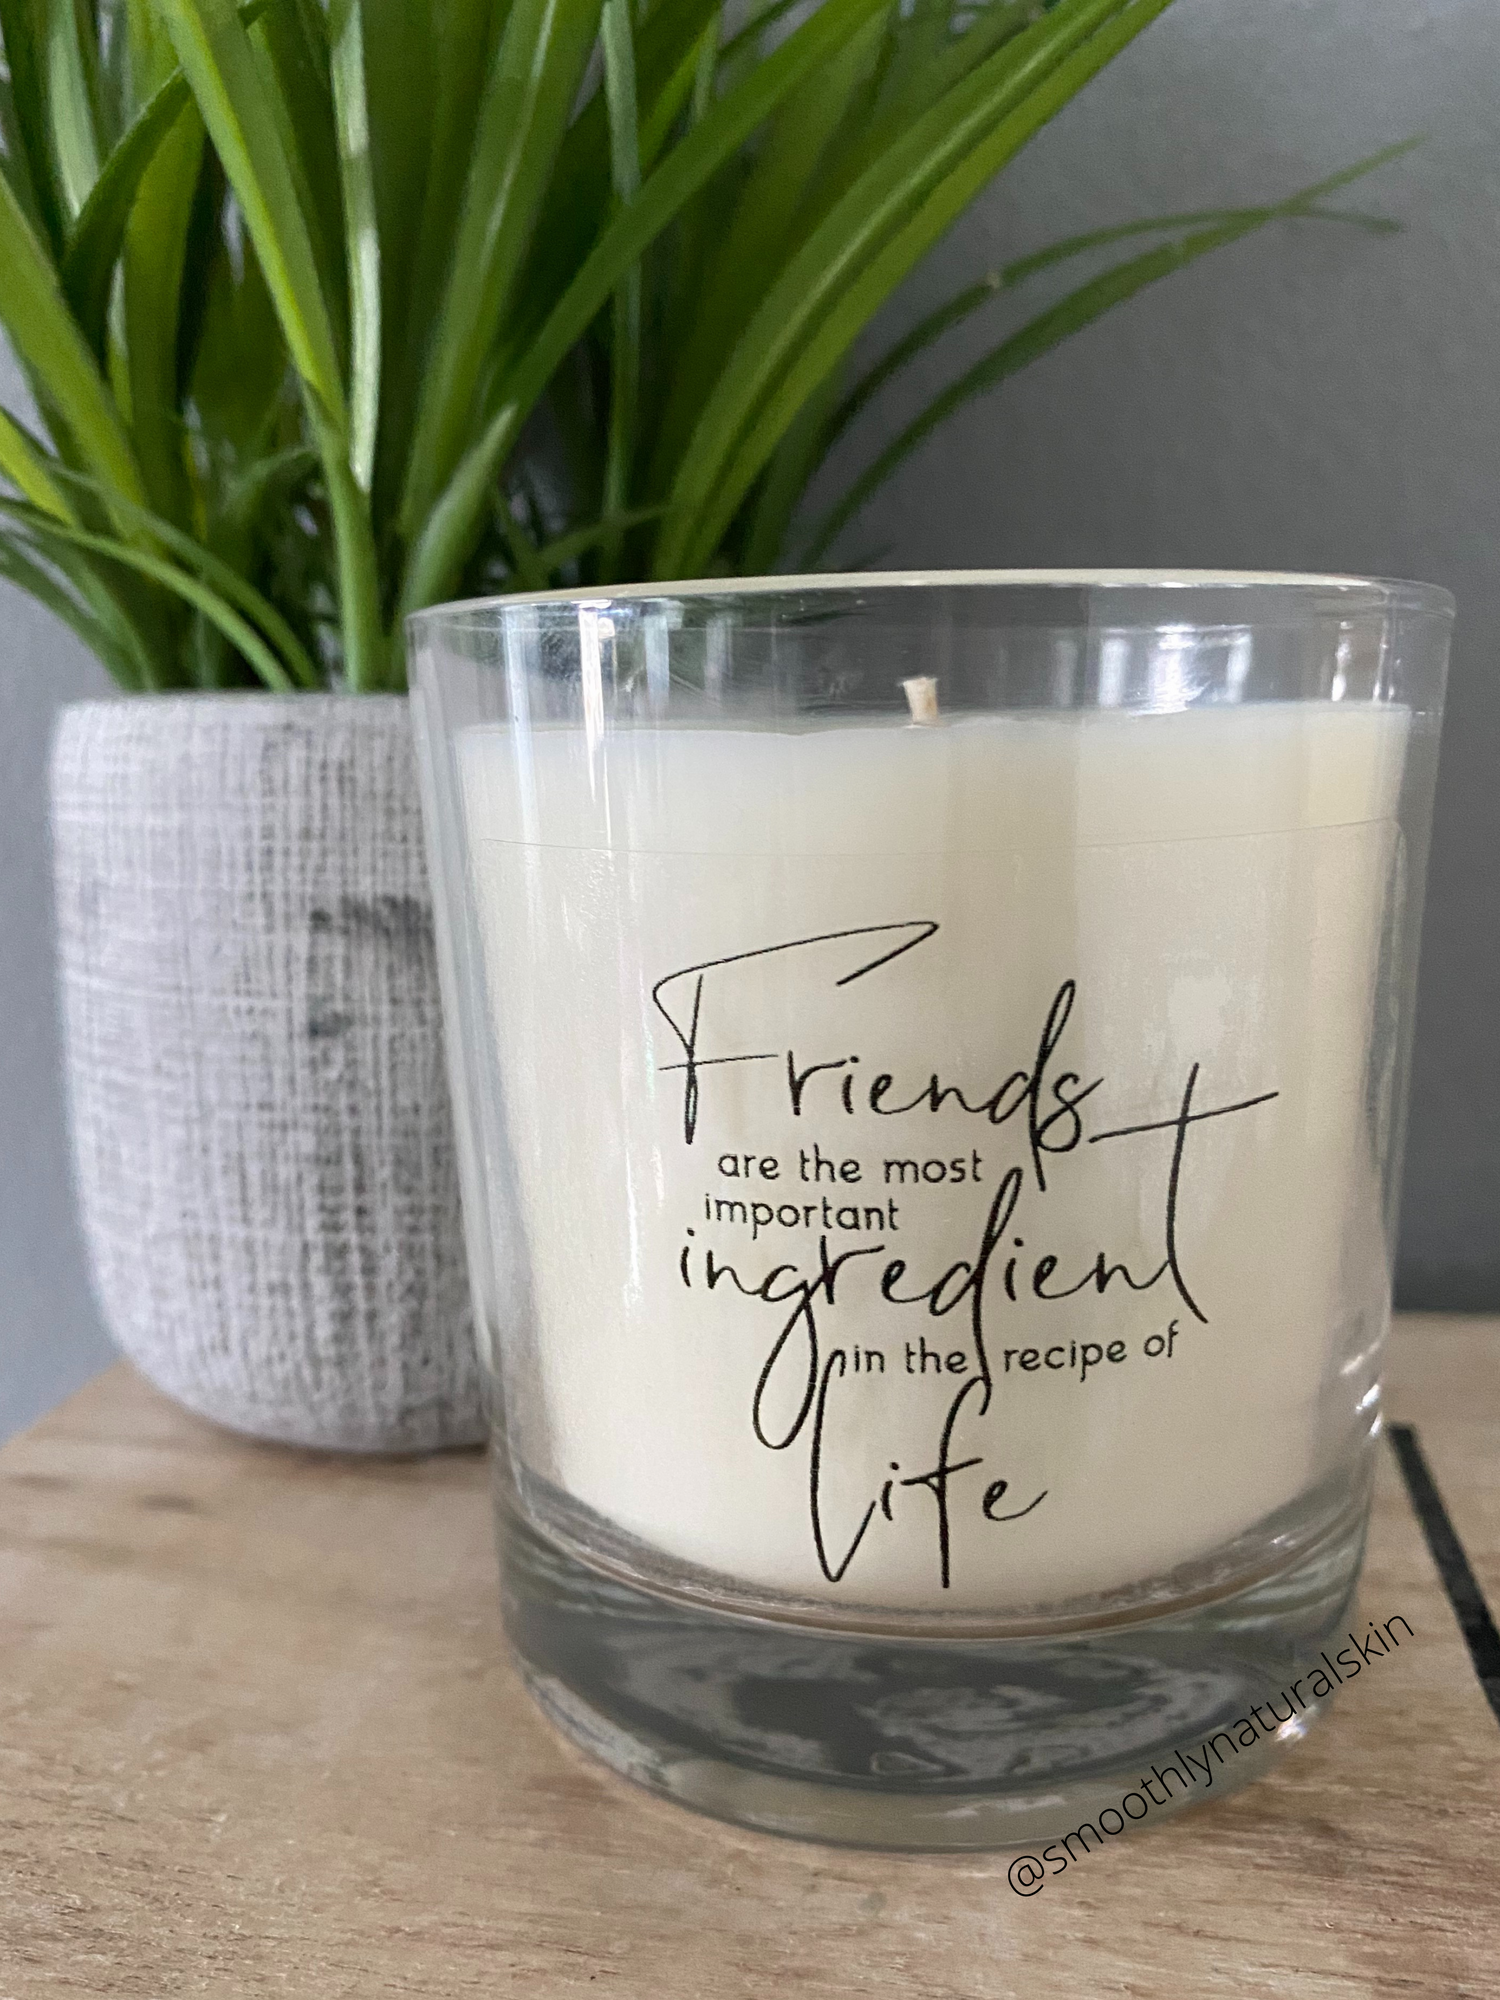 Soy Wax Candle  Description:  Friends are the most important ingredient in the recipe of life candle, is a perfect gift for that special friend. These unique candles are hand poured in small batches.  Ingredients:  Natural Soy Wax, Cotton Wick (Lead & Zinc Free) and Phthalate Free Fragrance. Volume: Net Wt. 7 oz. Smoothly Natural Skin 